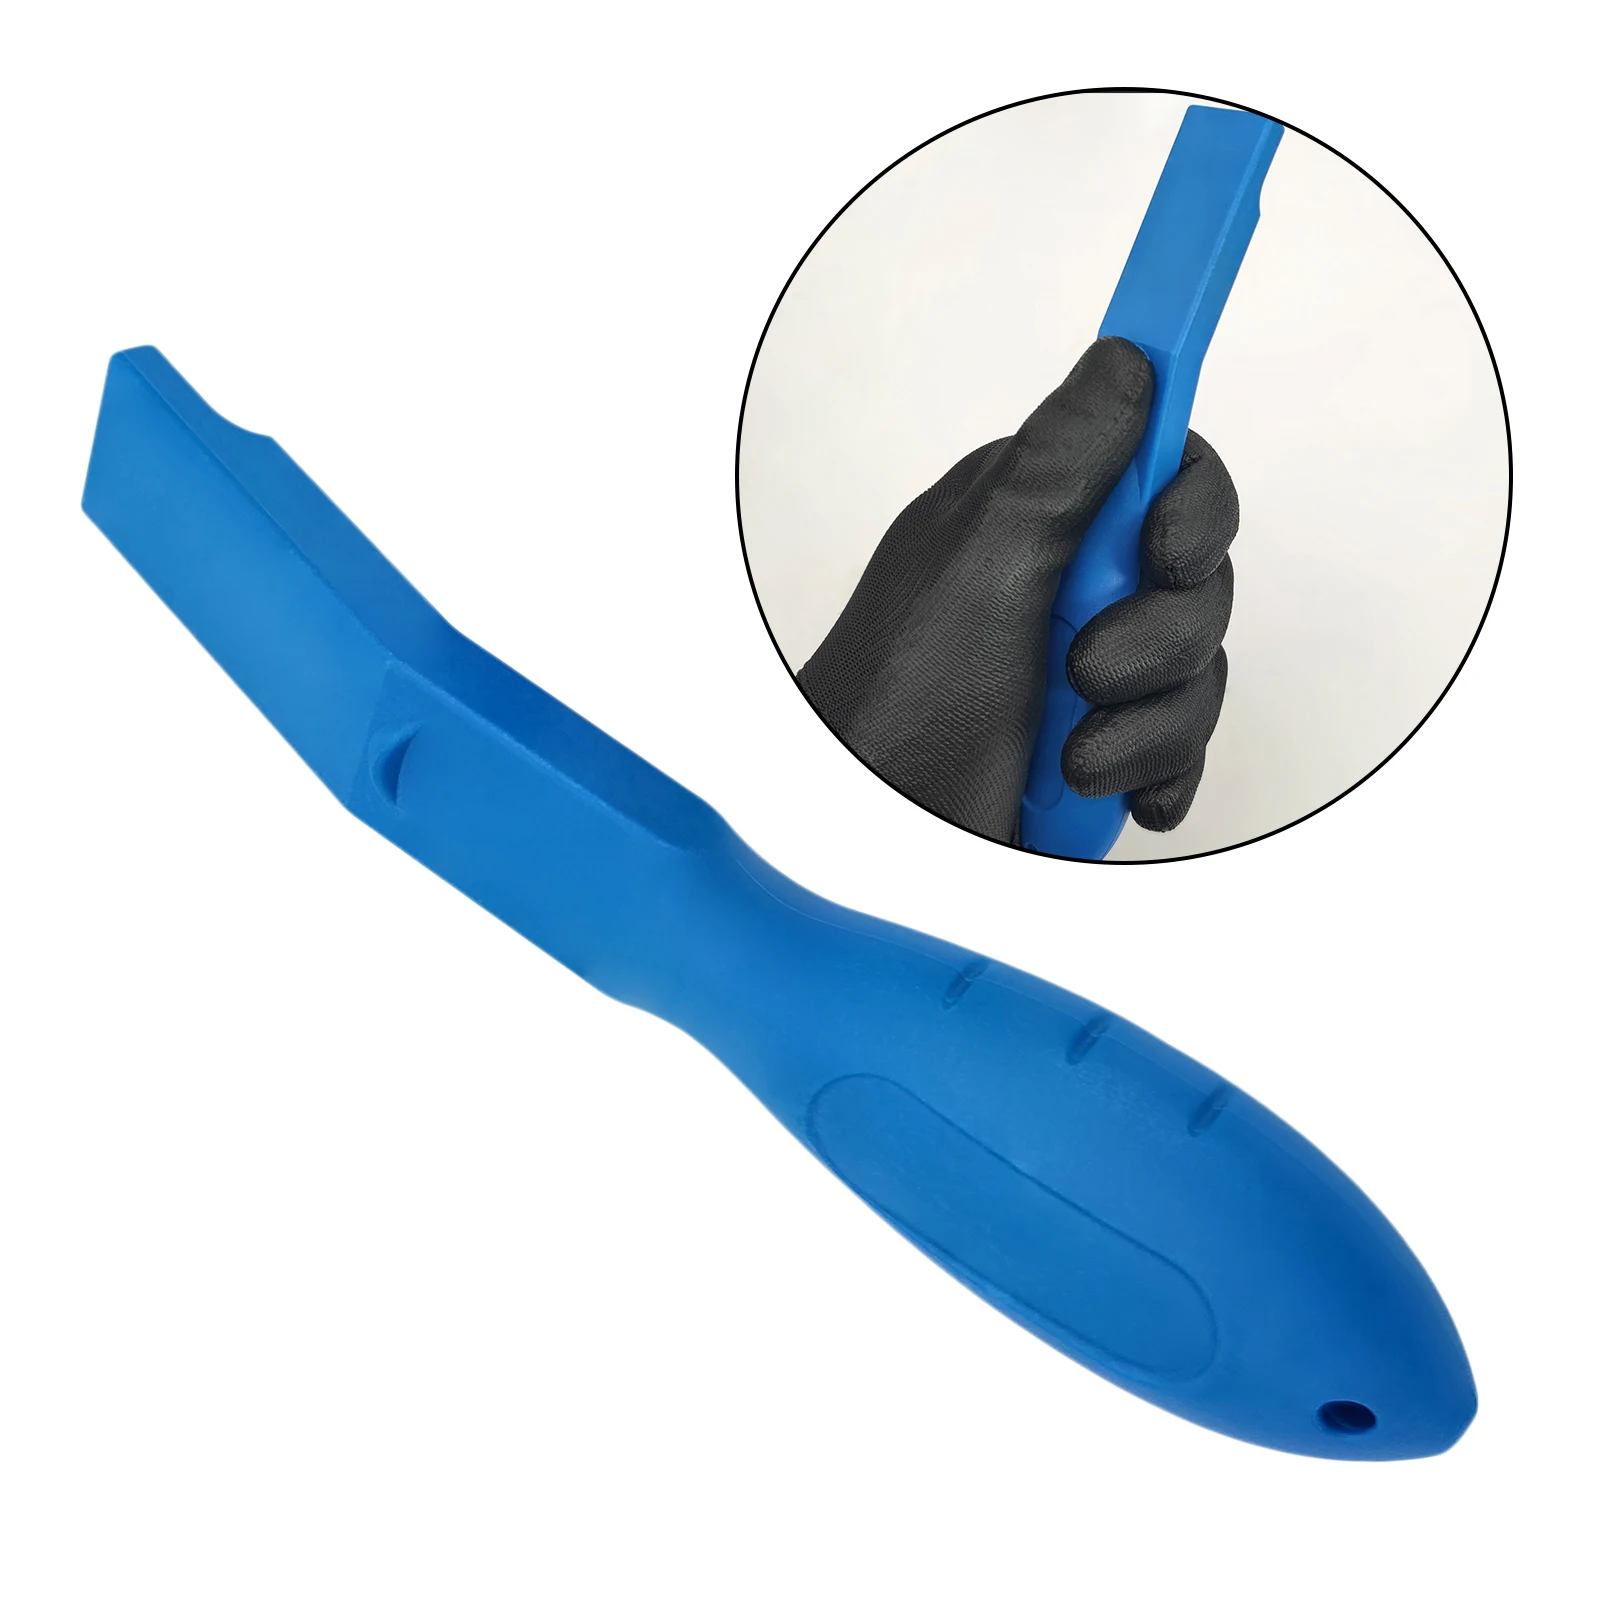 1Piece Rearview Mirror Removal Tool Vehicle Accessories Supplies Fits for Ford Vehicles After 2004 Rear View Mirror